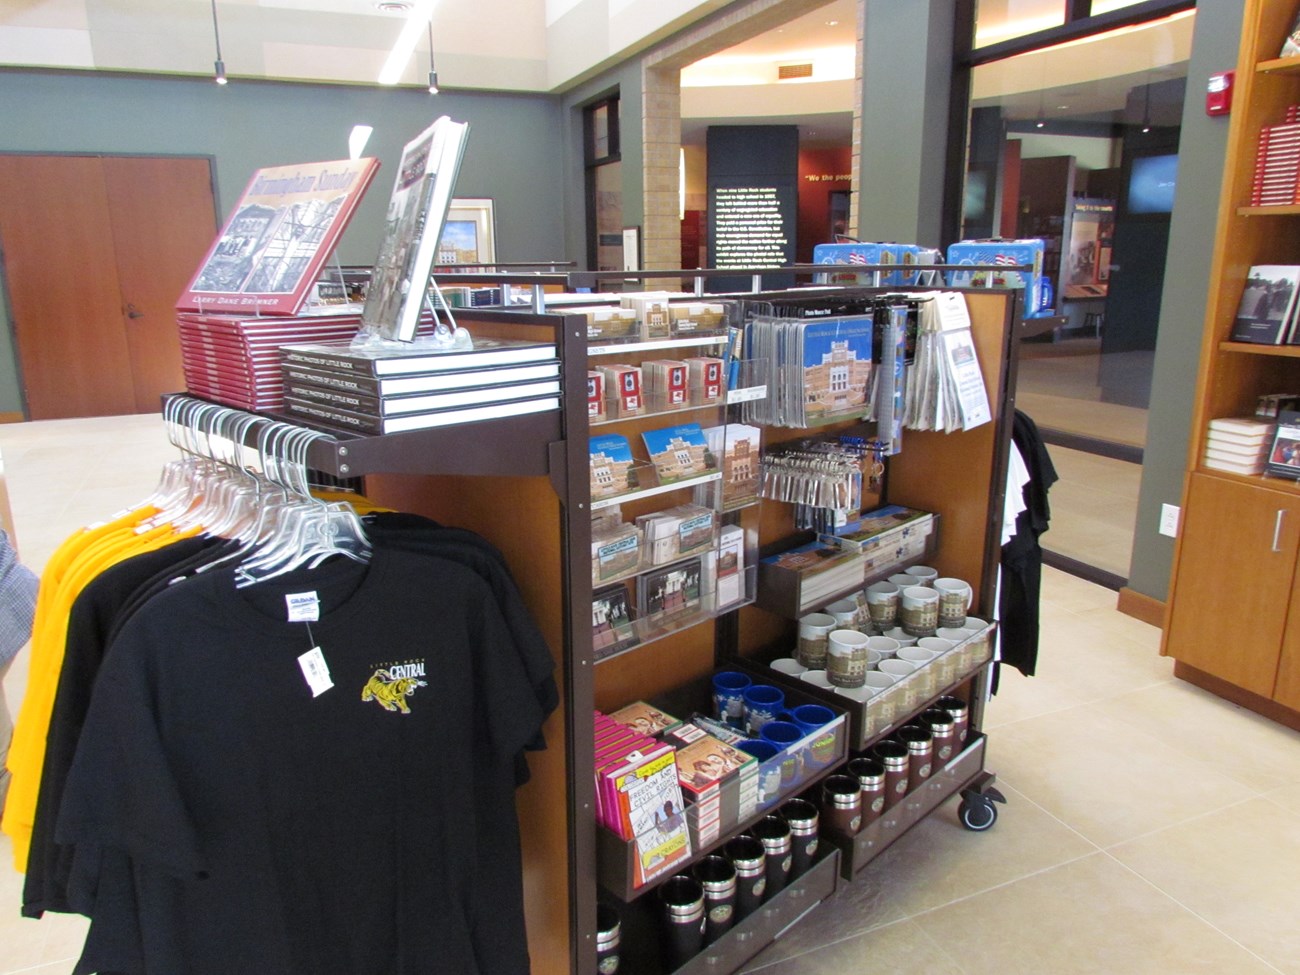 The JNPA Bookstore has gifts to commemorate your visit and educational content on the stories of civil rights and Central High's desegregation.